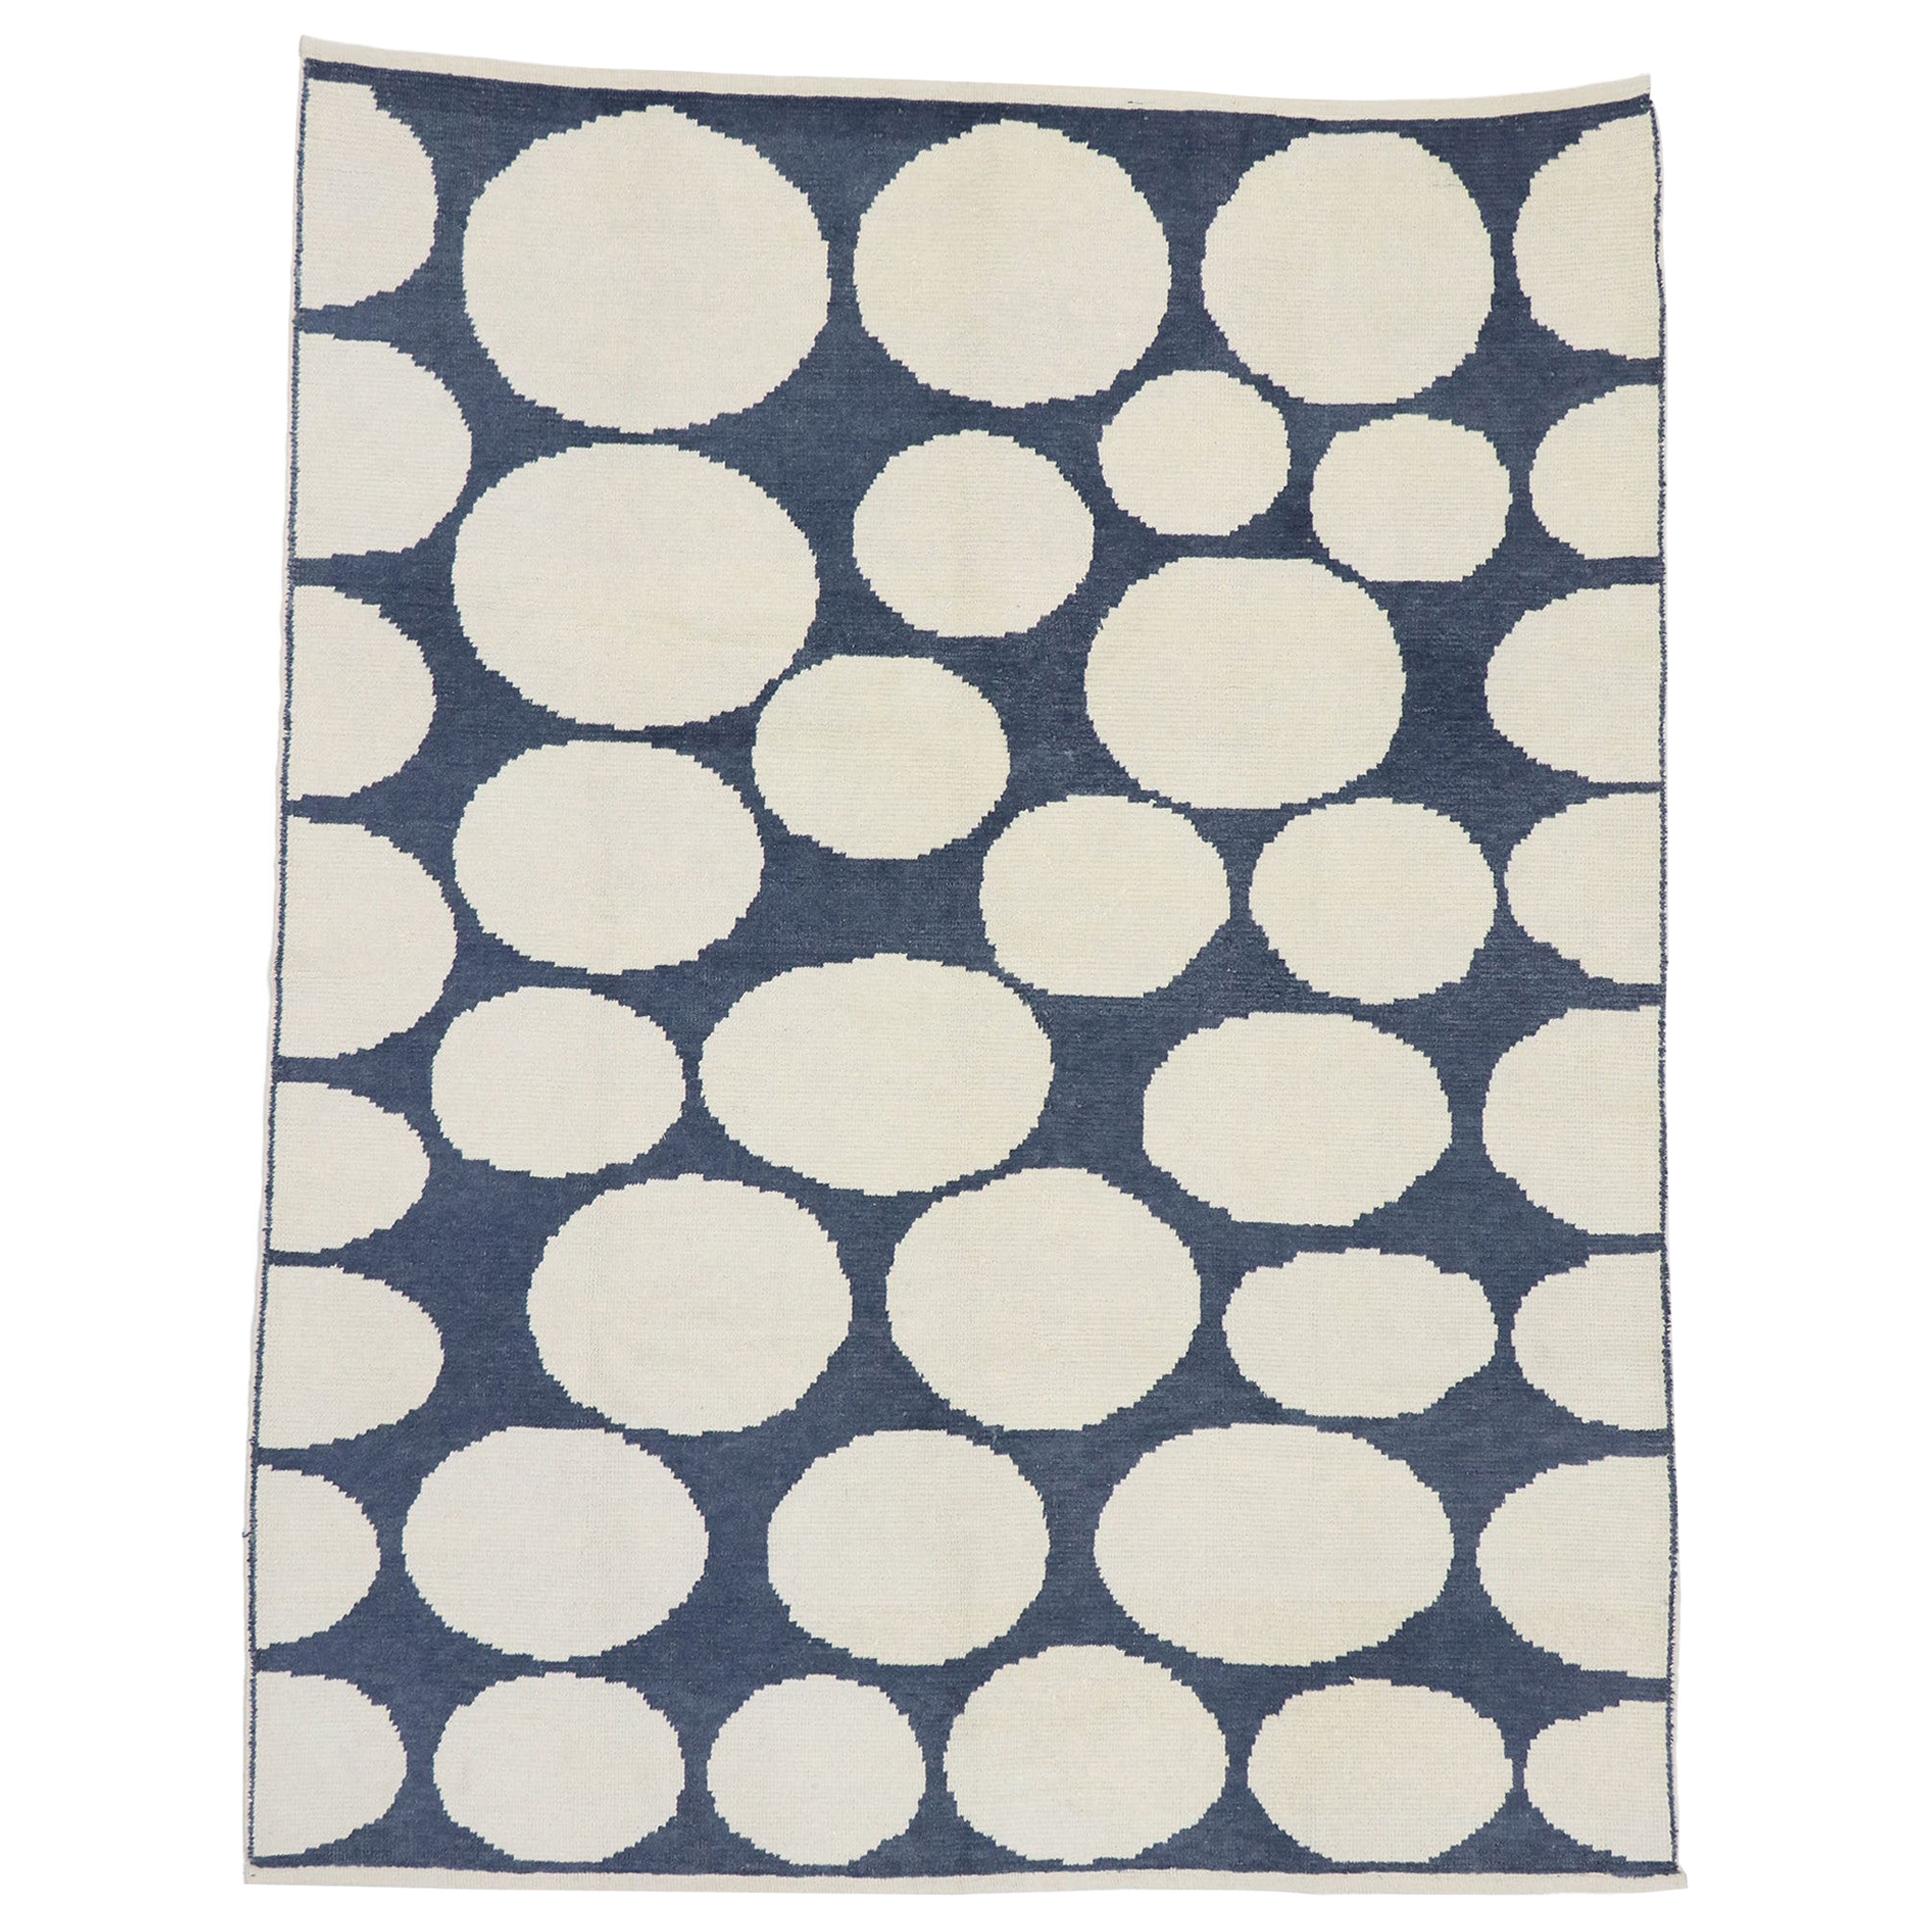 New Contemporary Moroccan Polka Dot Orphism Style Rug Inspired by Yayoi Kusama